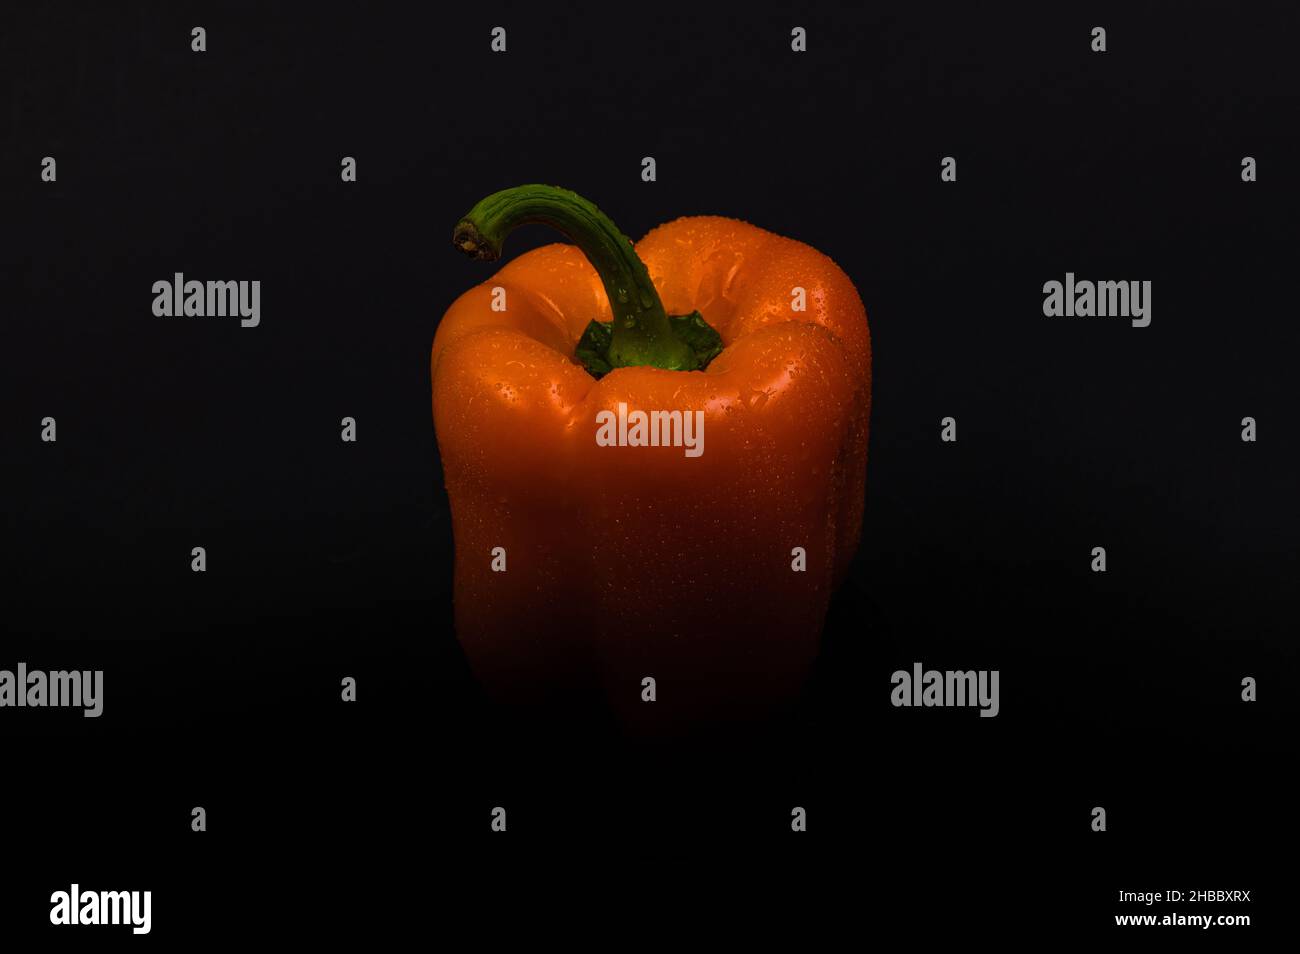 Orange bell pepper with water drops on a black background Stock Photo